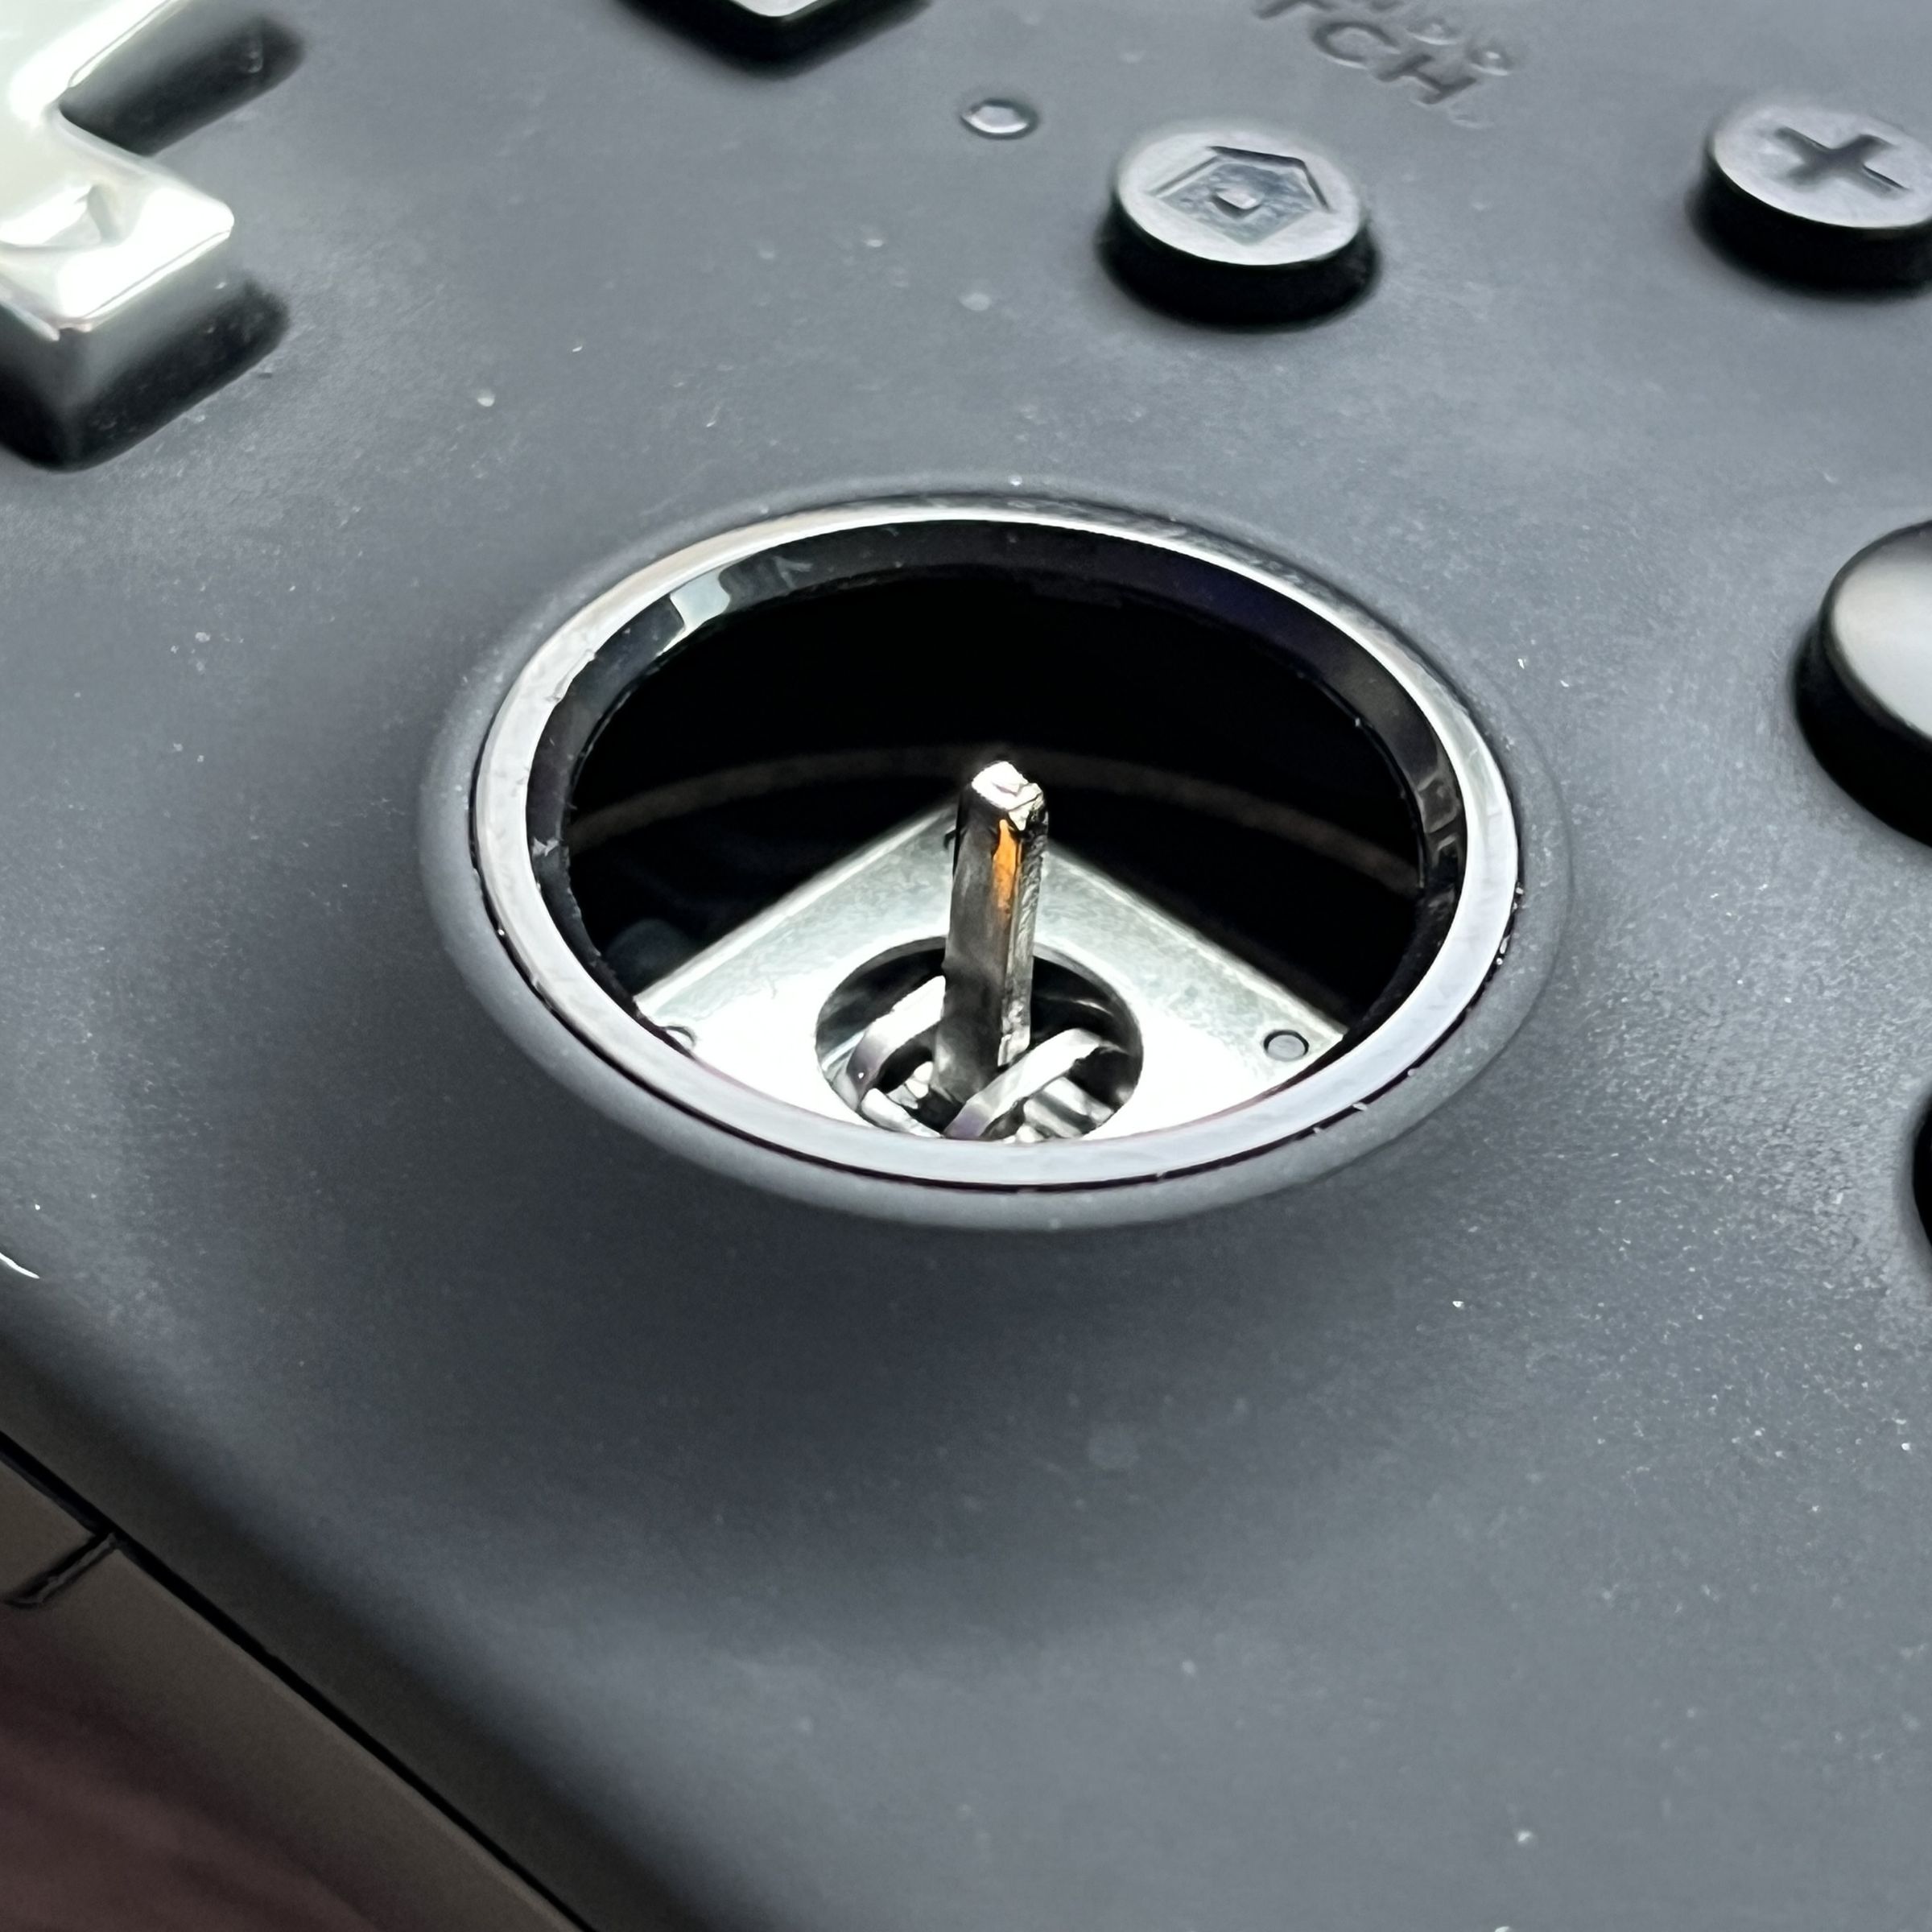 Close-up of the hole where the right joystick cover should be, but now there’s an analog mechanism with a skinny metal rod protruding out. Visible face buttons are the B, Y, home, and plus buttons along with a silver directional pad on a matte black controller.